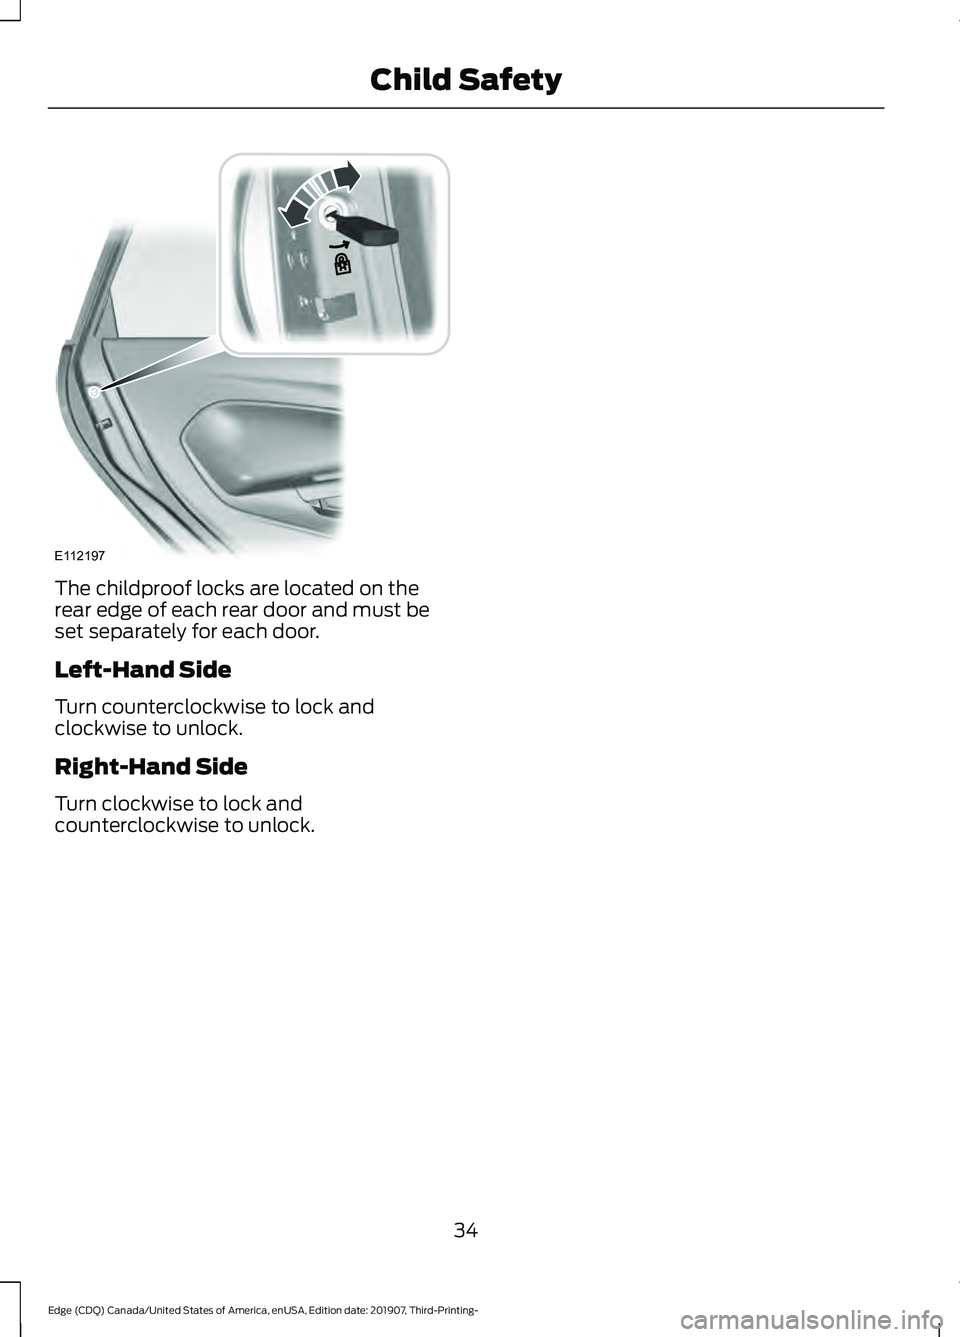 FORD EDGE 2020 Owners Guide The childproof locks are located on the
rear edge of each rear door and must be
set separately for each door.
Left-Hand Side
Turn counterclockwise to lock and
clockwise to unlock.
Right-Hand Side
Turn